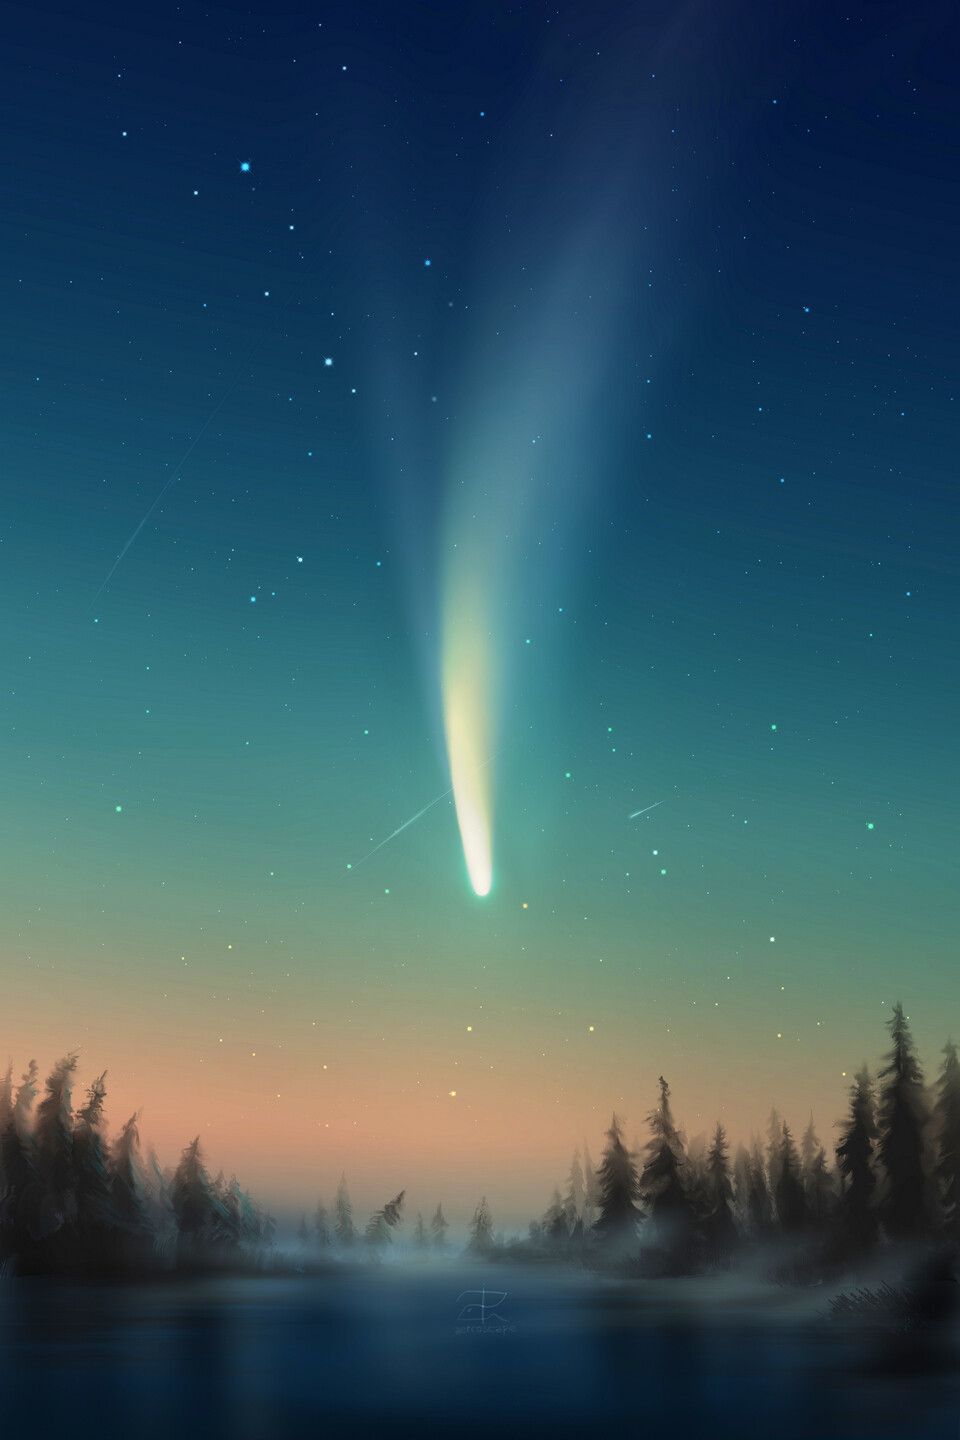 Comet Neowise above nature